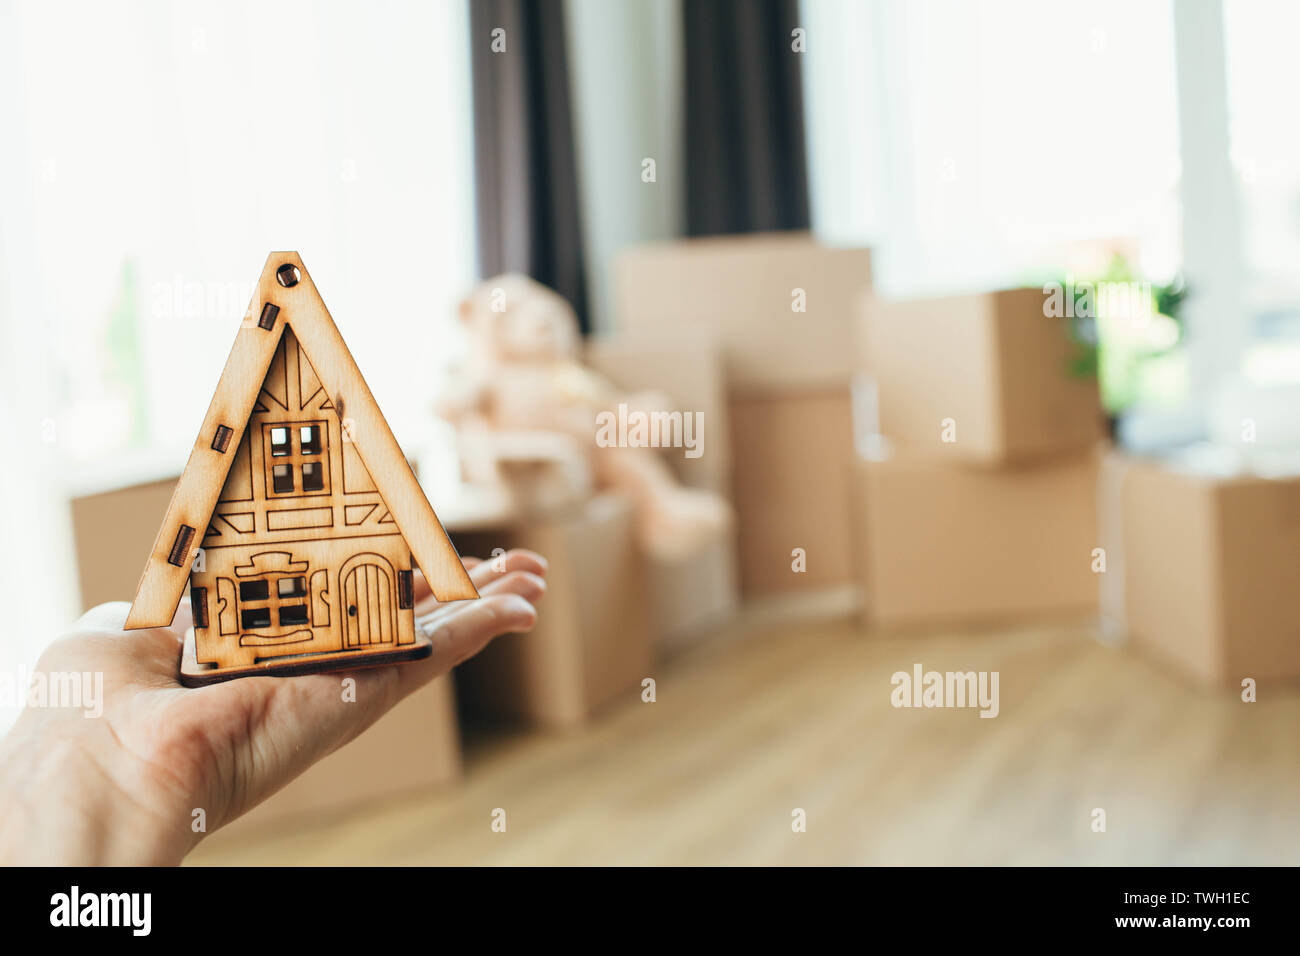 moving to a new home, buying a home. woman holding a miniature wooden small house on the background of cardboard boxes Stock Photo